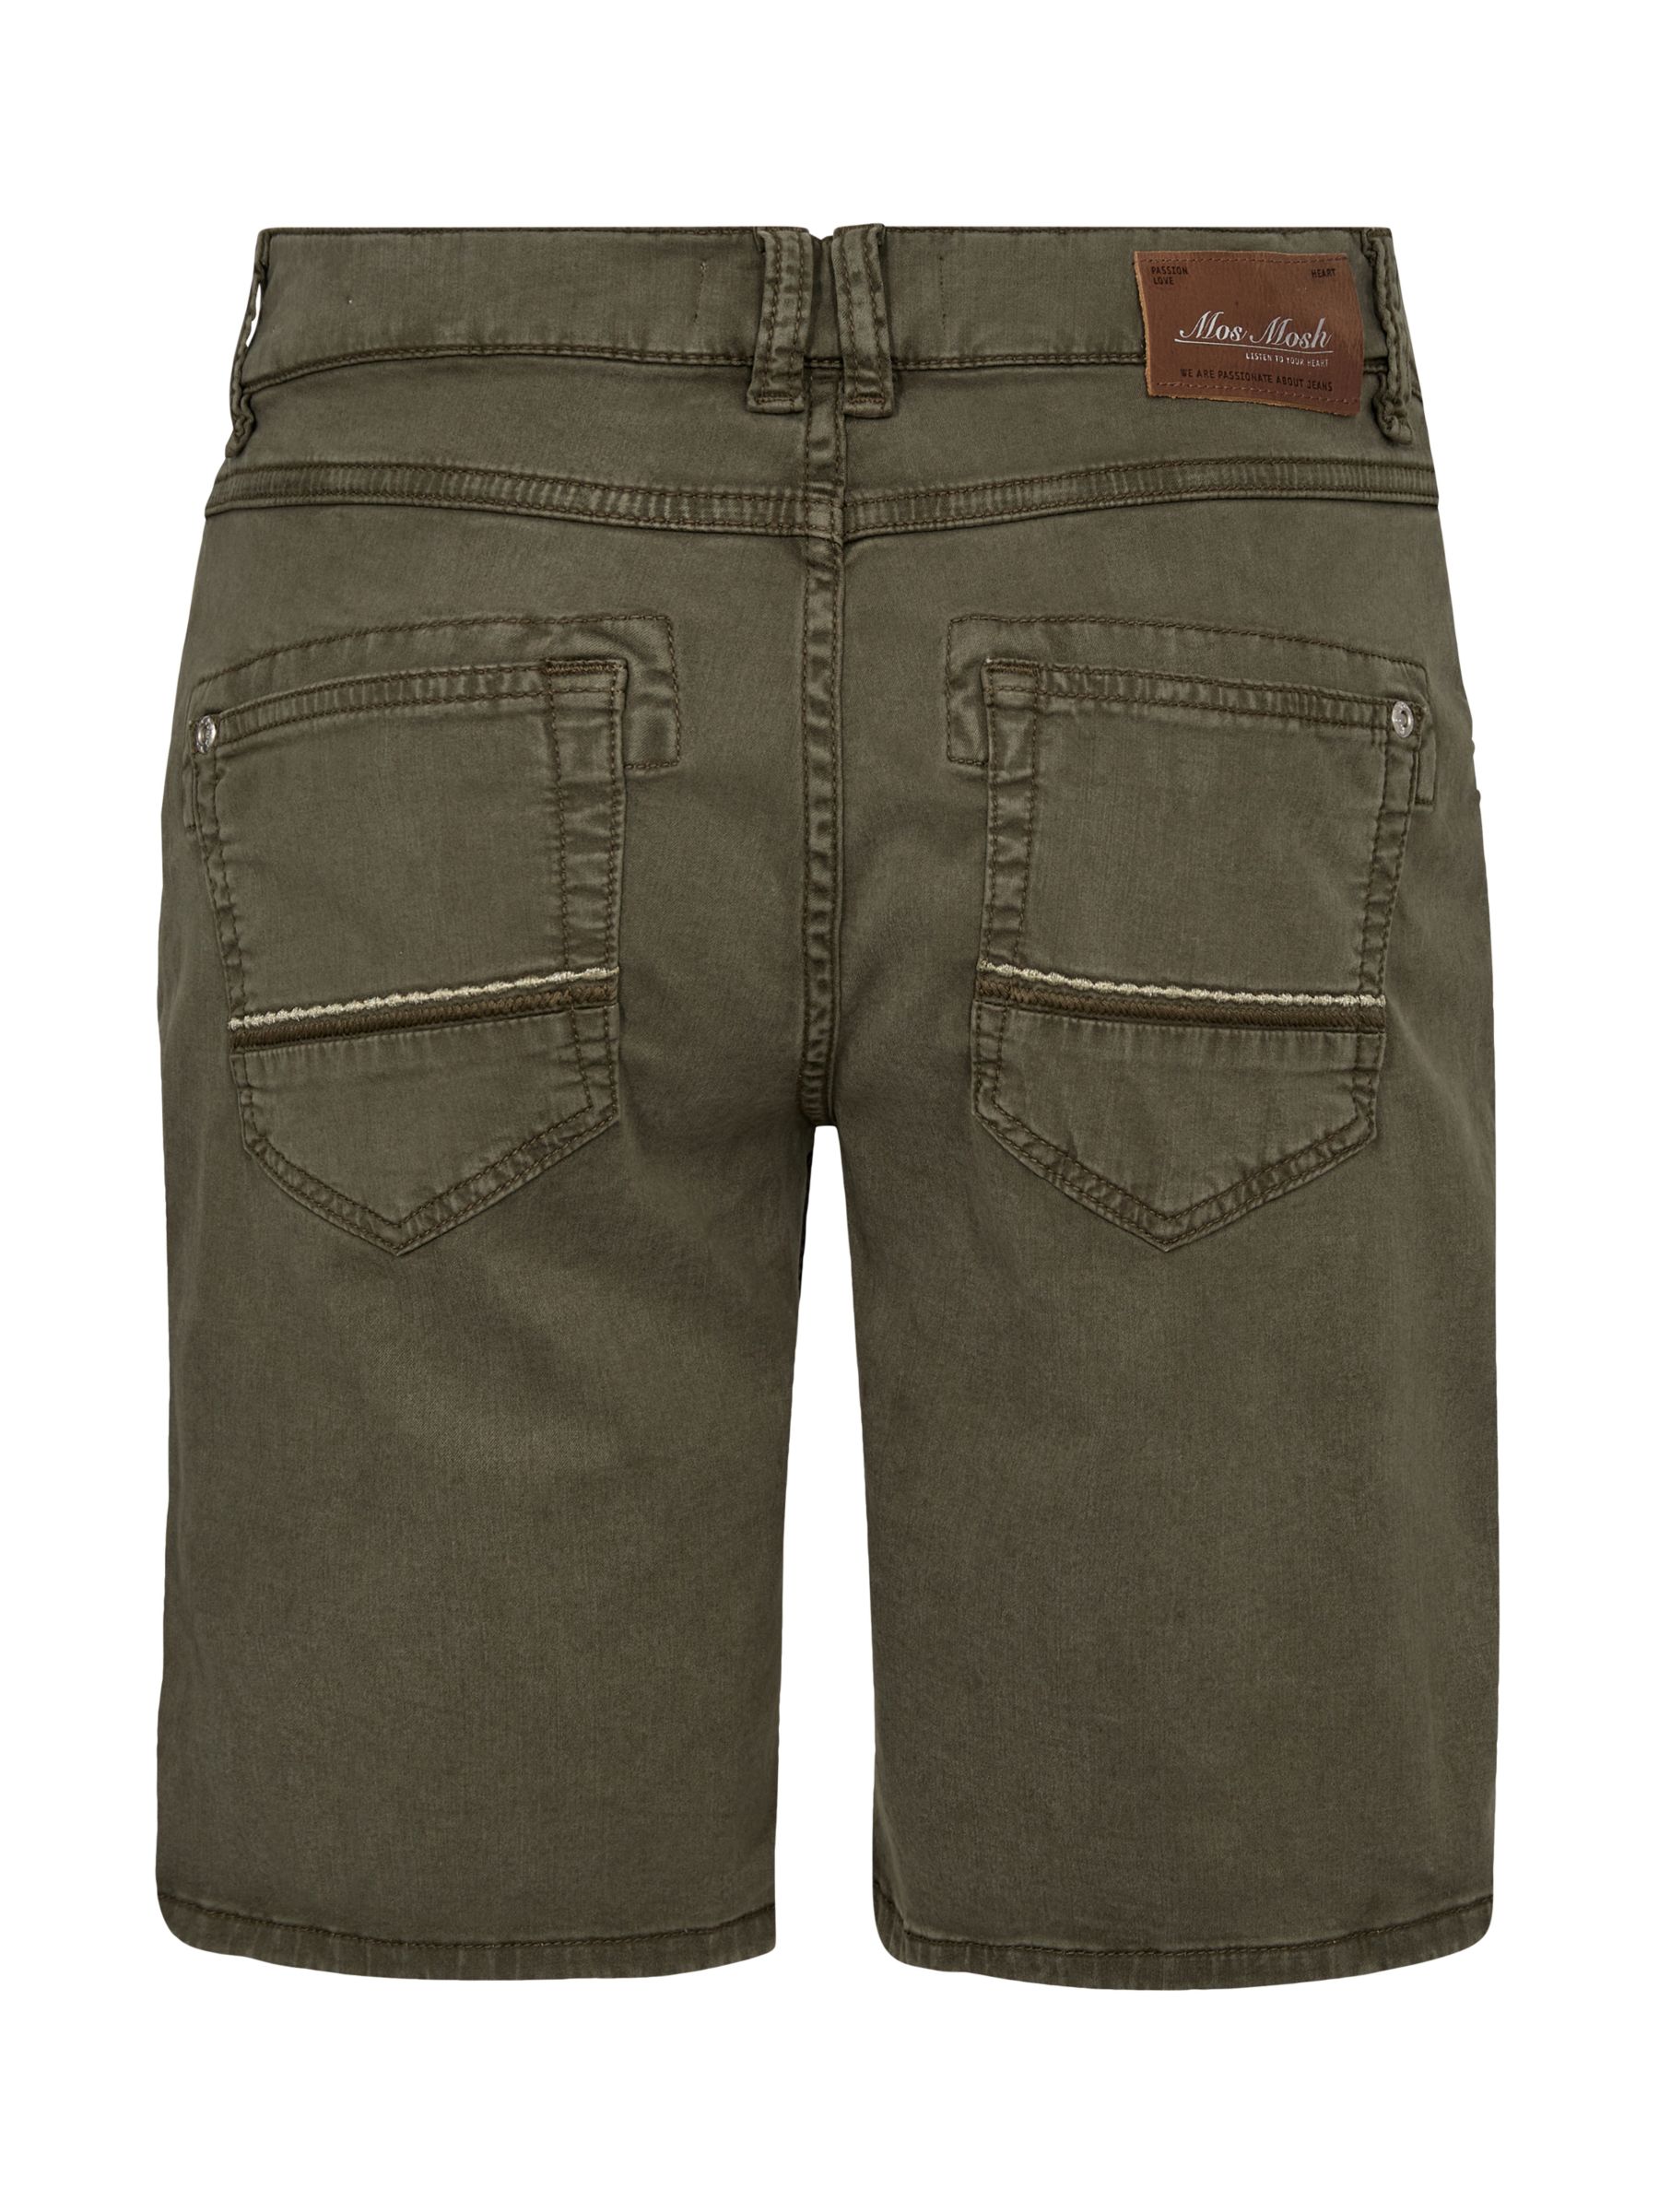 Buy MOS MOSH Naomi Treasure Embroidered Shorts, Dusty Olive Online at johnlewis.com